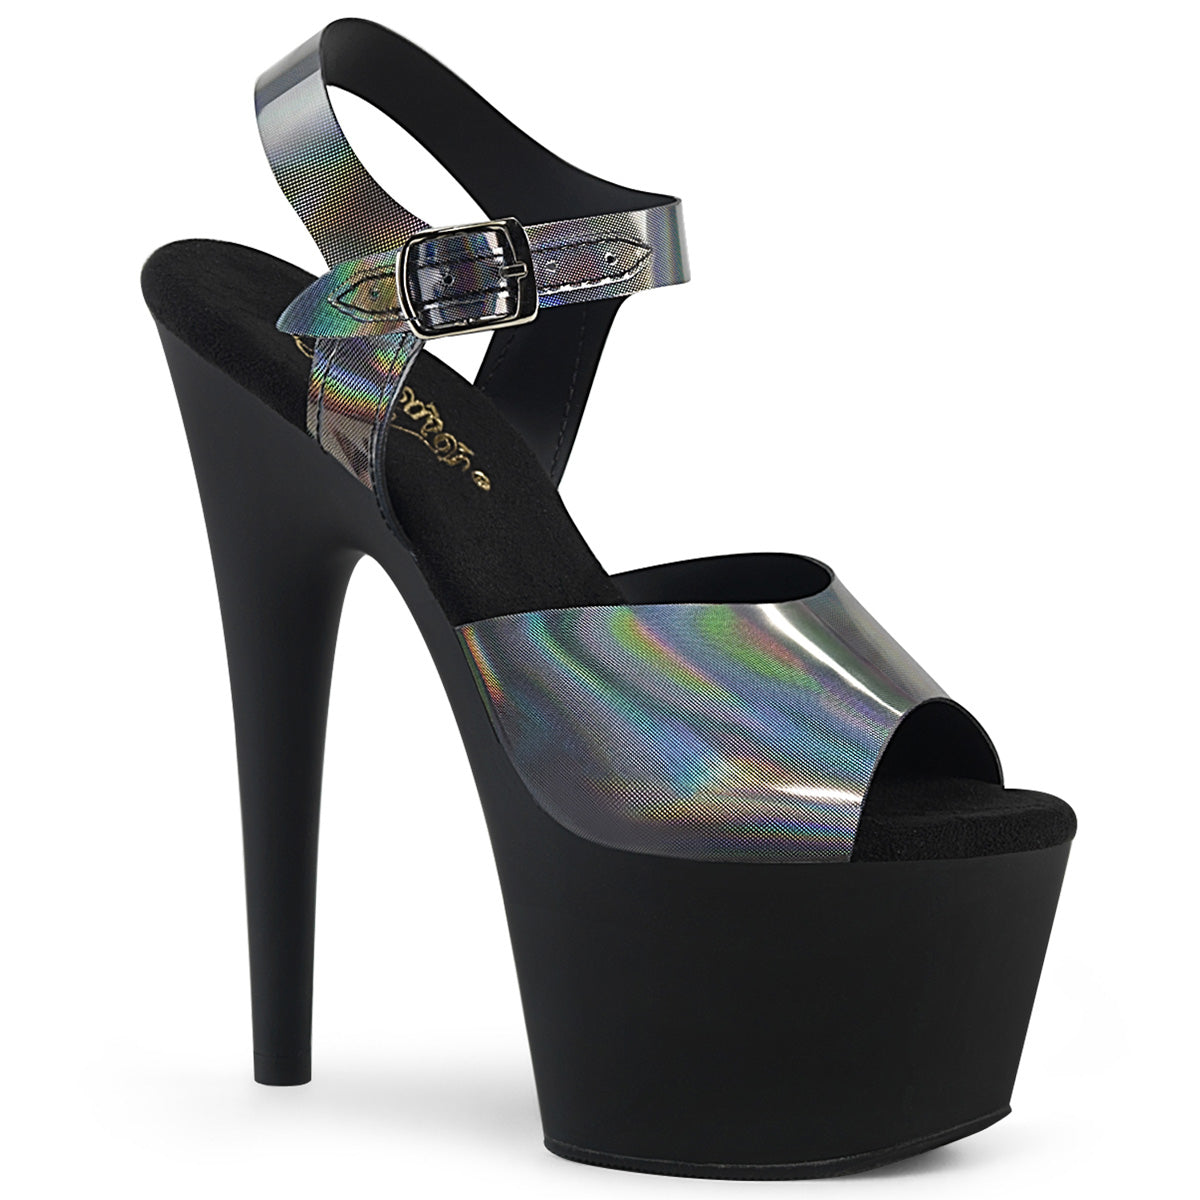 ADORE-708N-DT Pleaser Sexy 7" Heel Pewter Pole Dancer Shoes